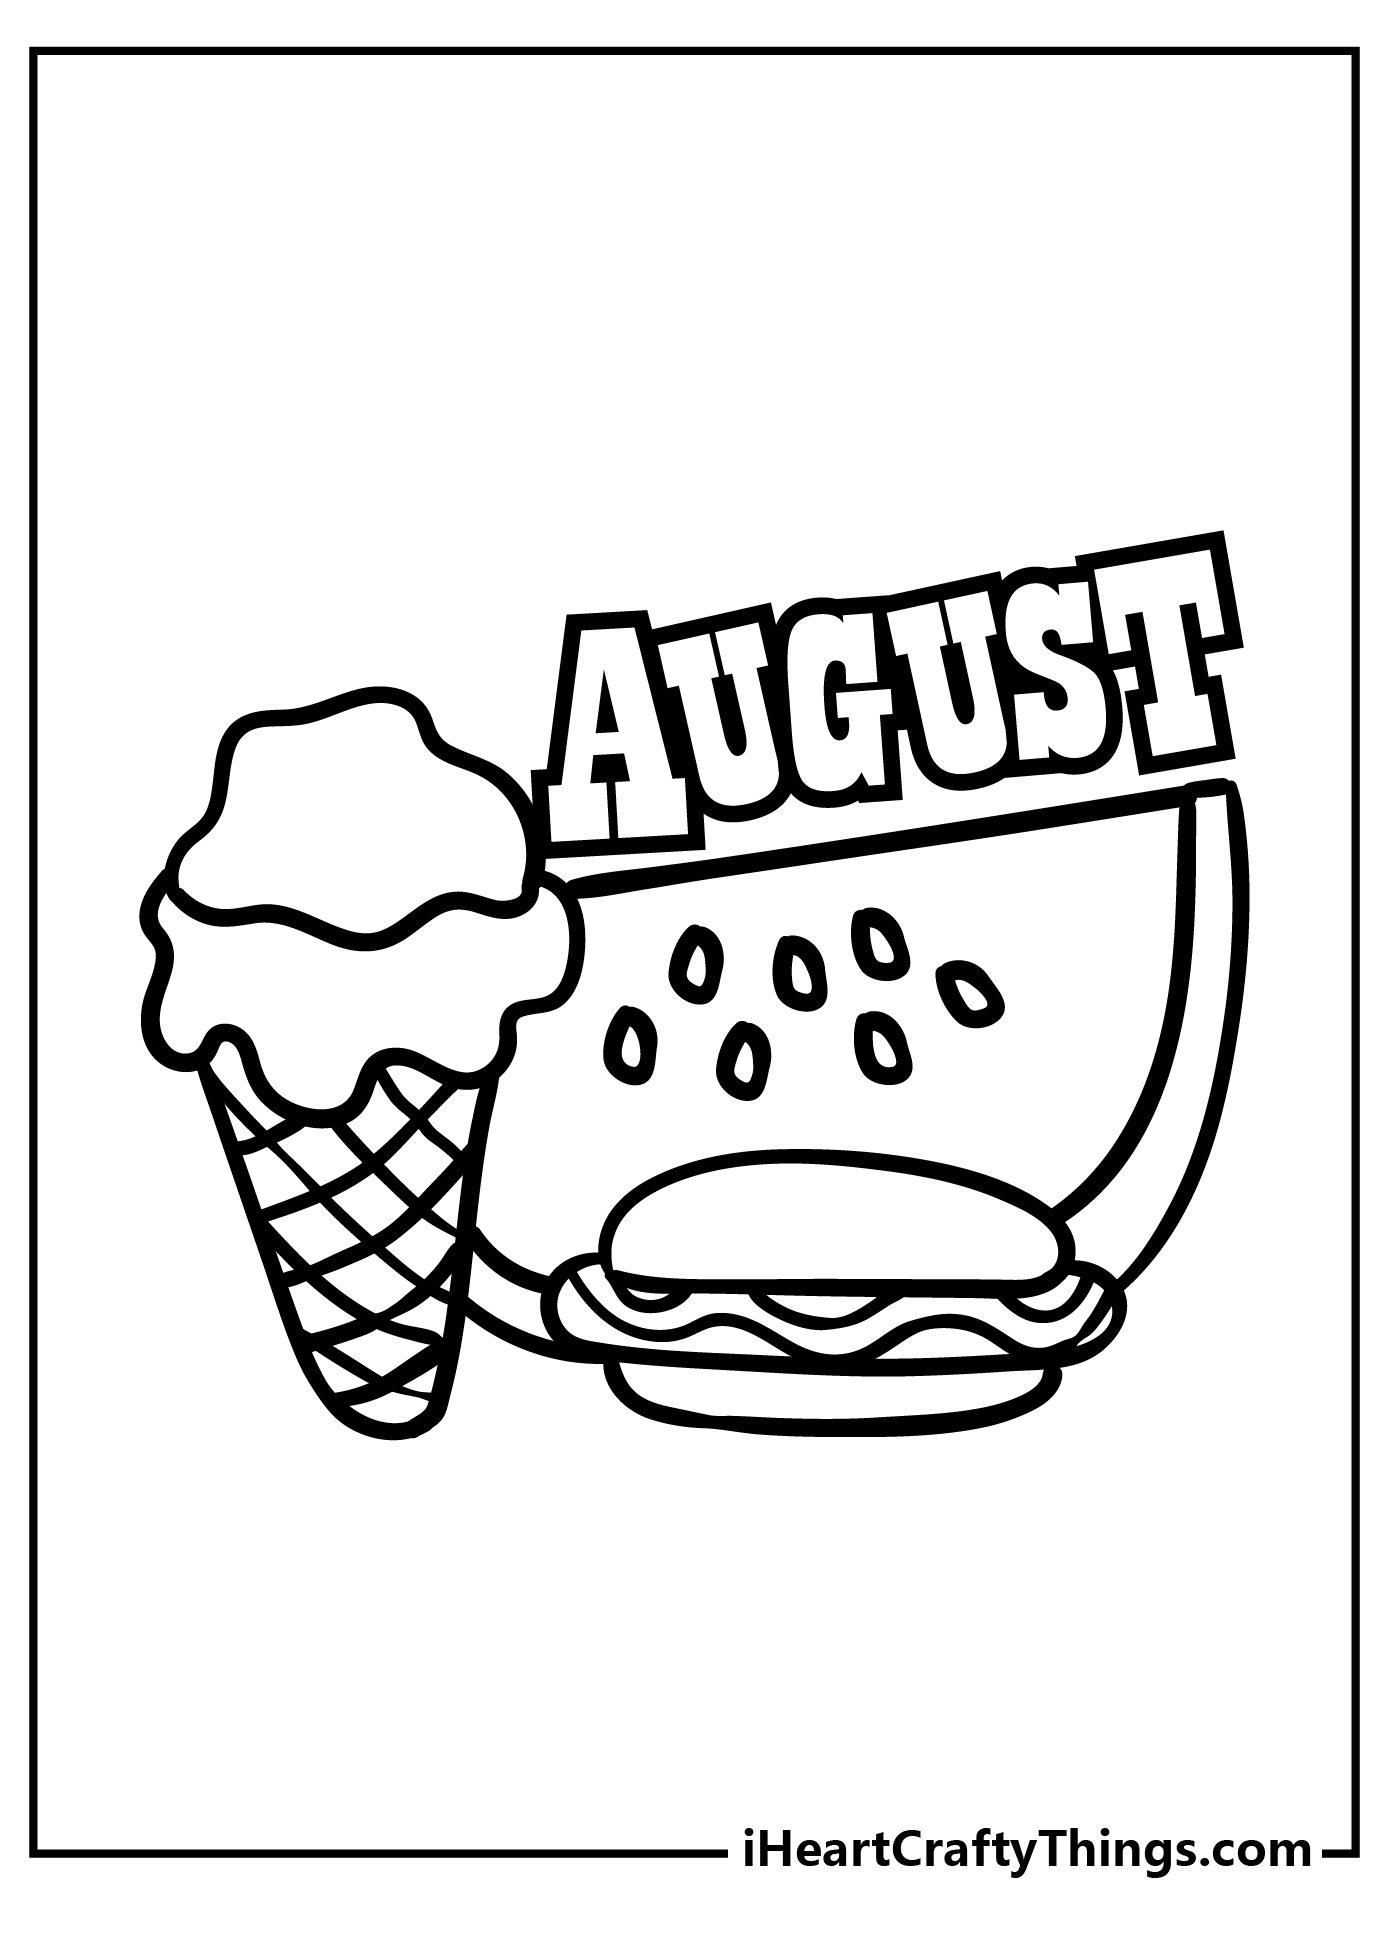 August coloring pages free pdf download